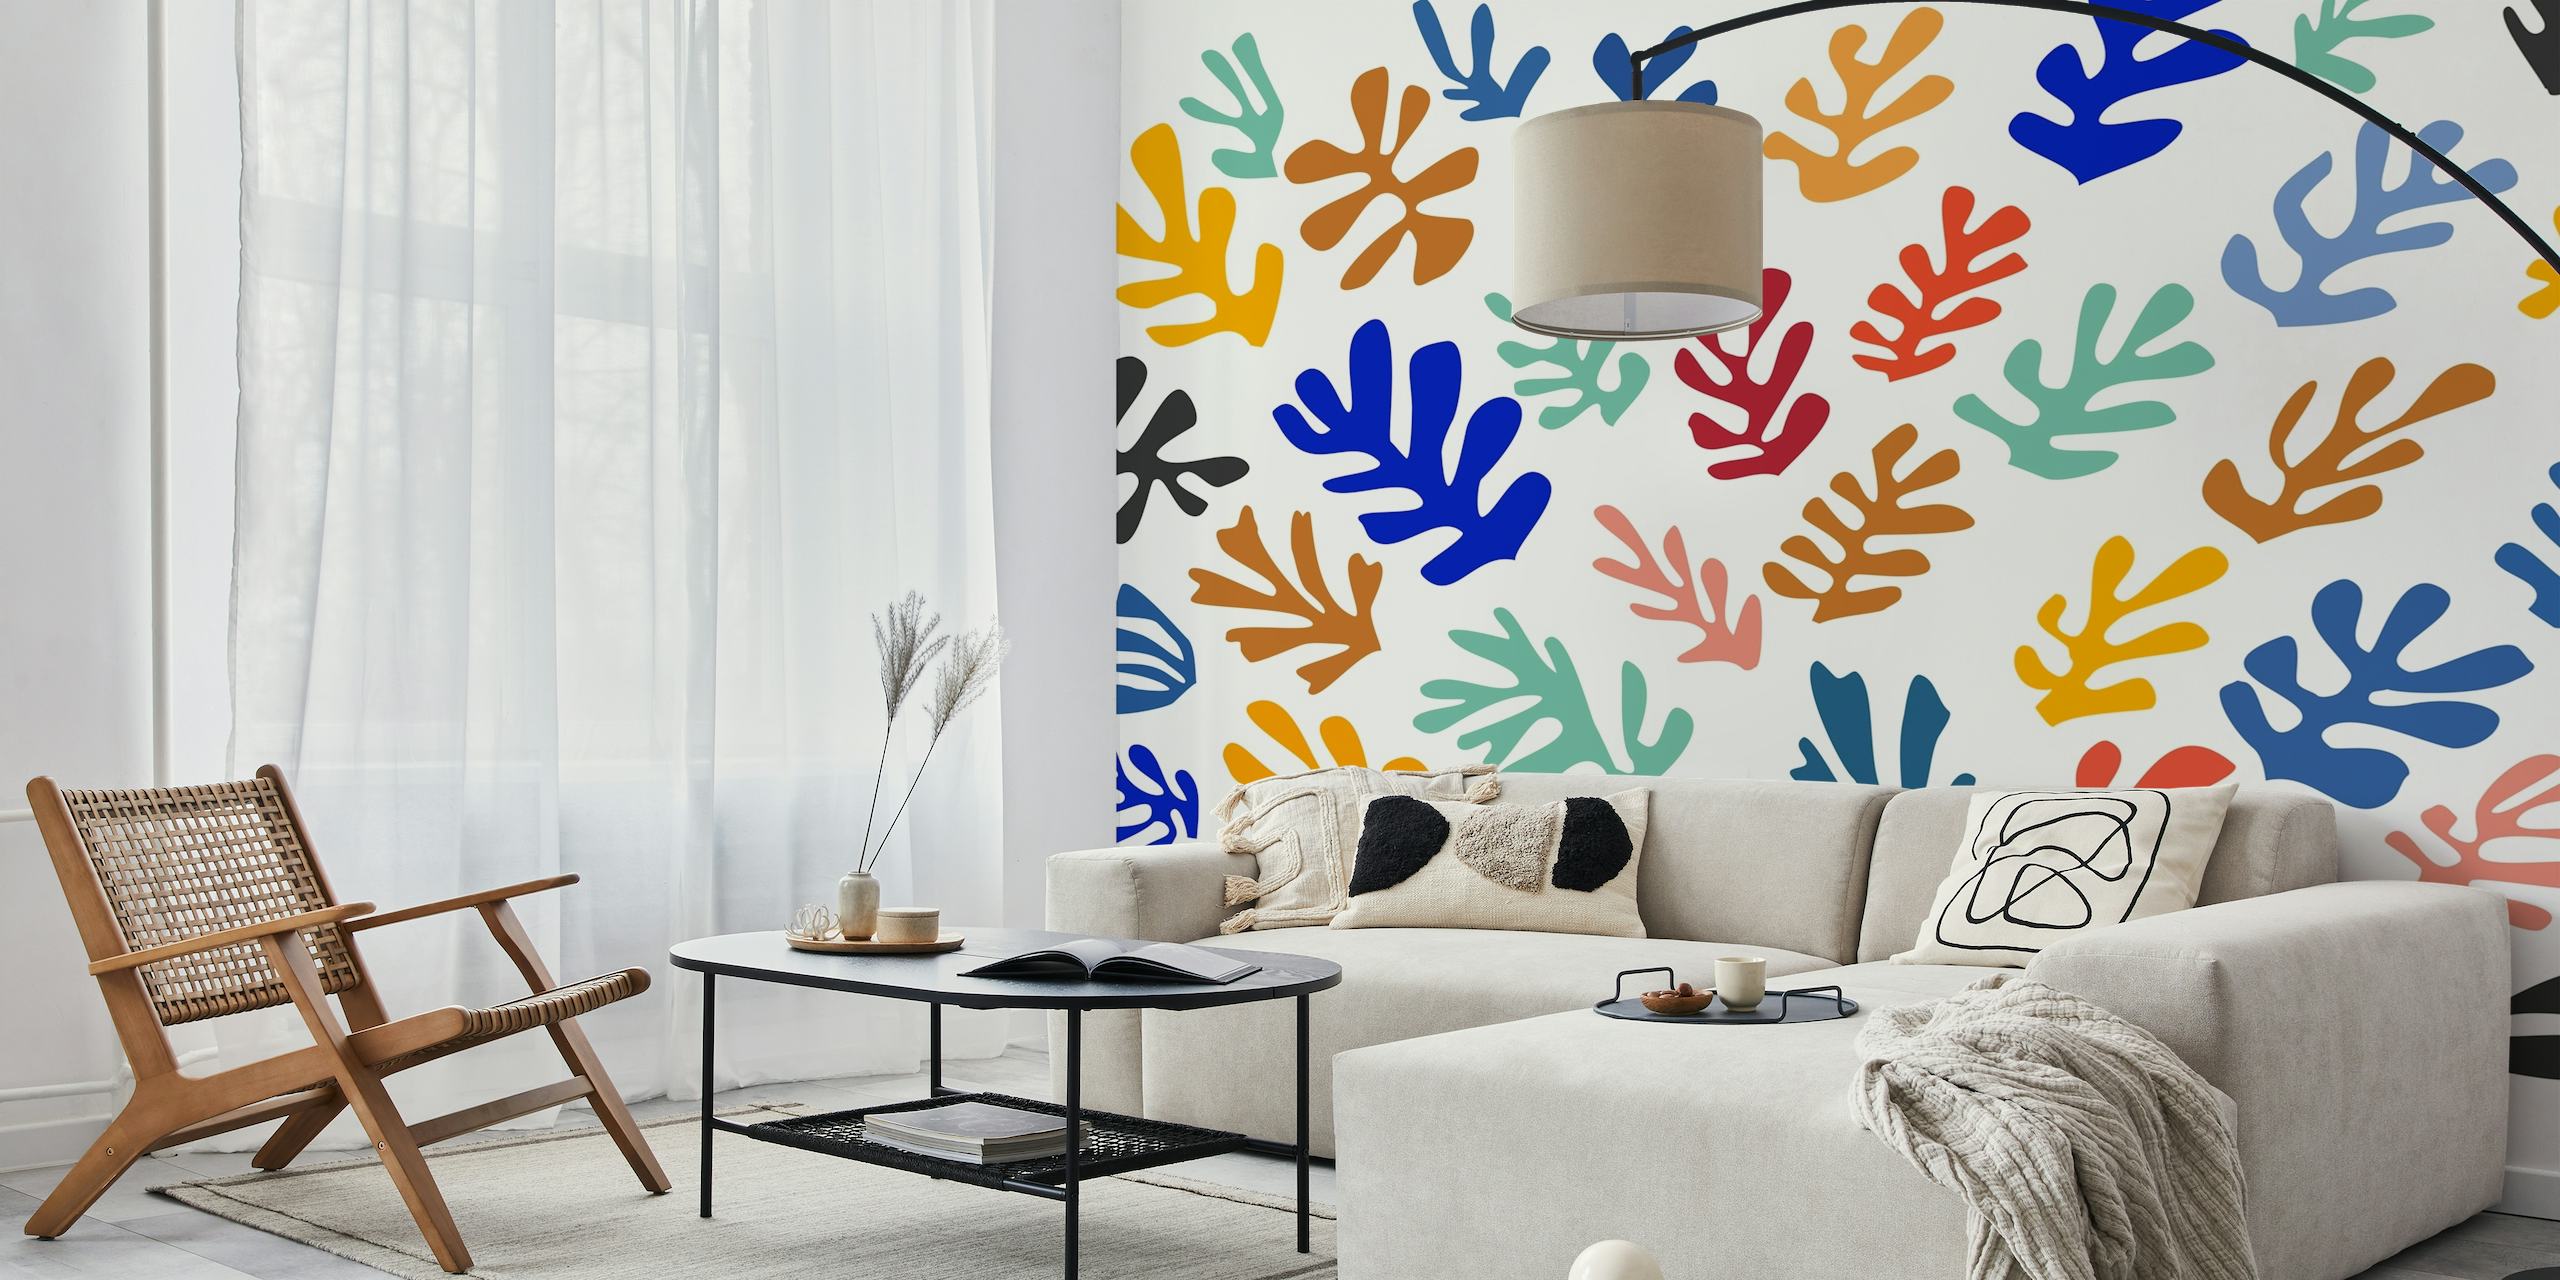 Matisse-inspired wallpaper displaying a medley of vibrant colors and dynamic design